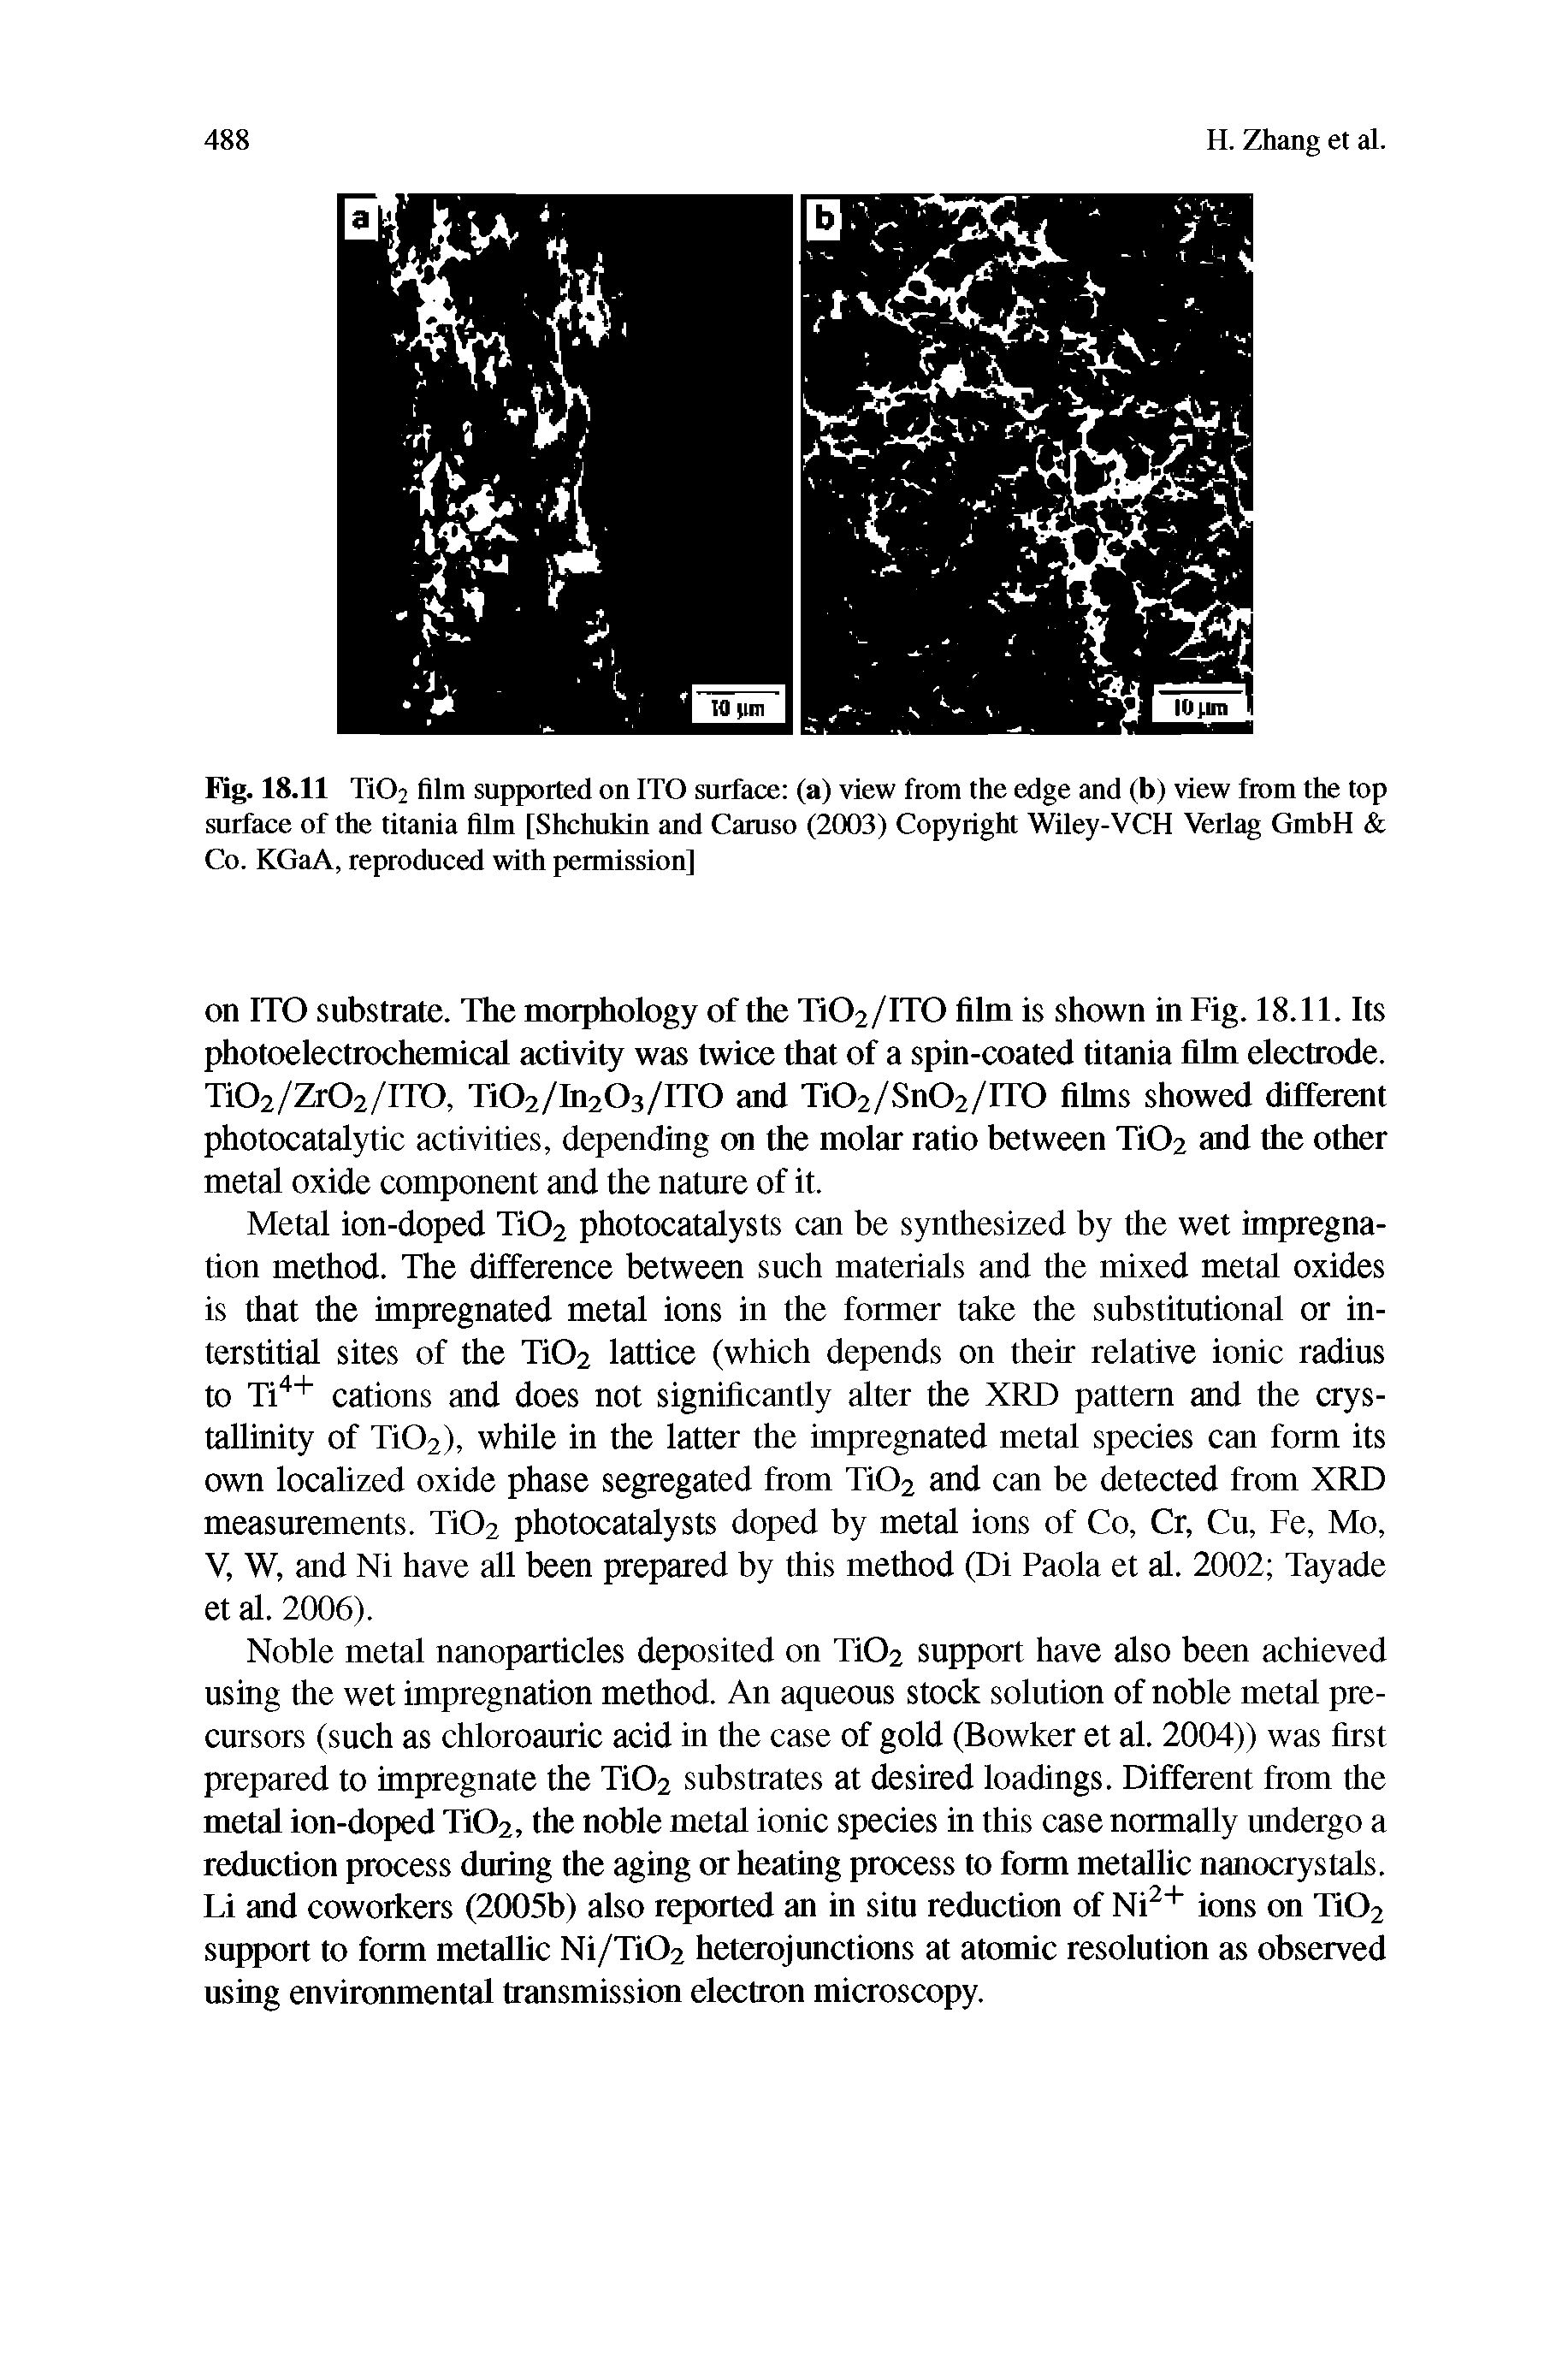 Fig. 18.11 TiOj film supported on ITO surface (a) view from the edge and (b) view from the top surface of the titania film [Shchukin and Caruso (2003) Copyright Wiley-VCH Verlag GmbH Co. KGaA, reproduced with permission]...